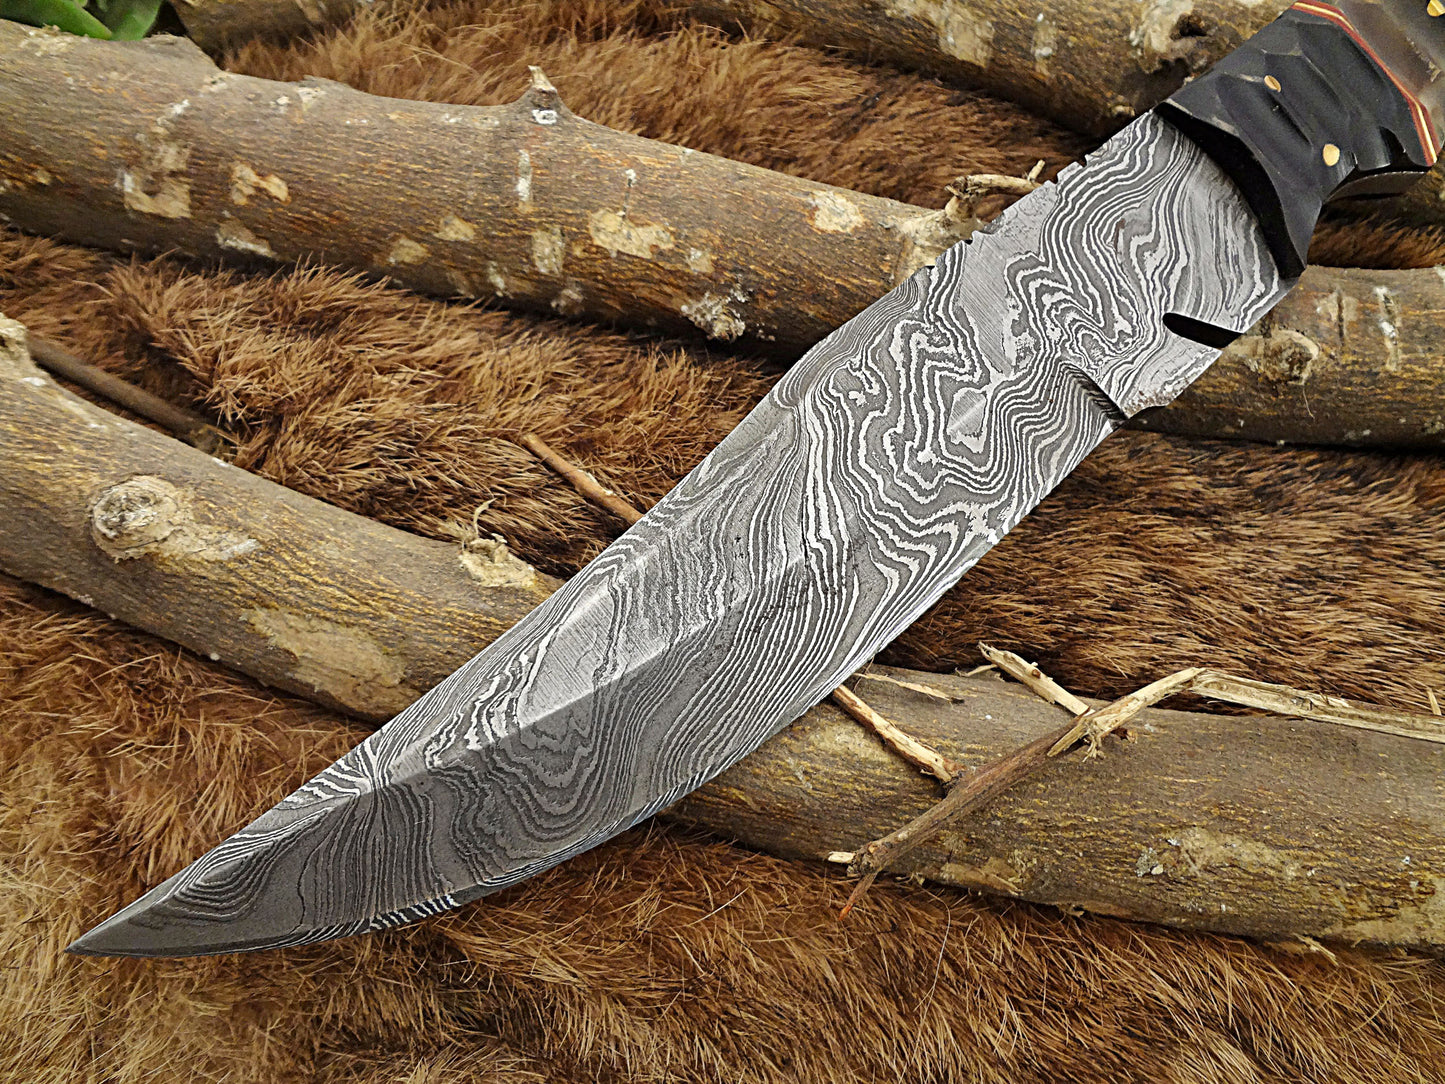 12" DAMASCUS SKINNING HUNTING FULL TANG BLADE KNIFE, JIGGED BULL HORN SCALE, COW HIDE LEATHER SHEATH INCLUDED